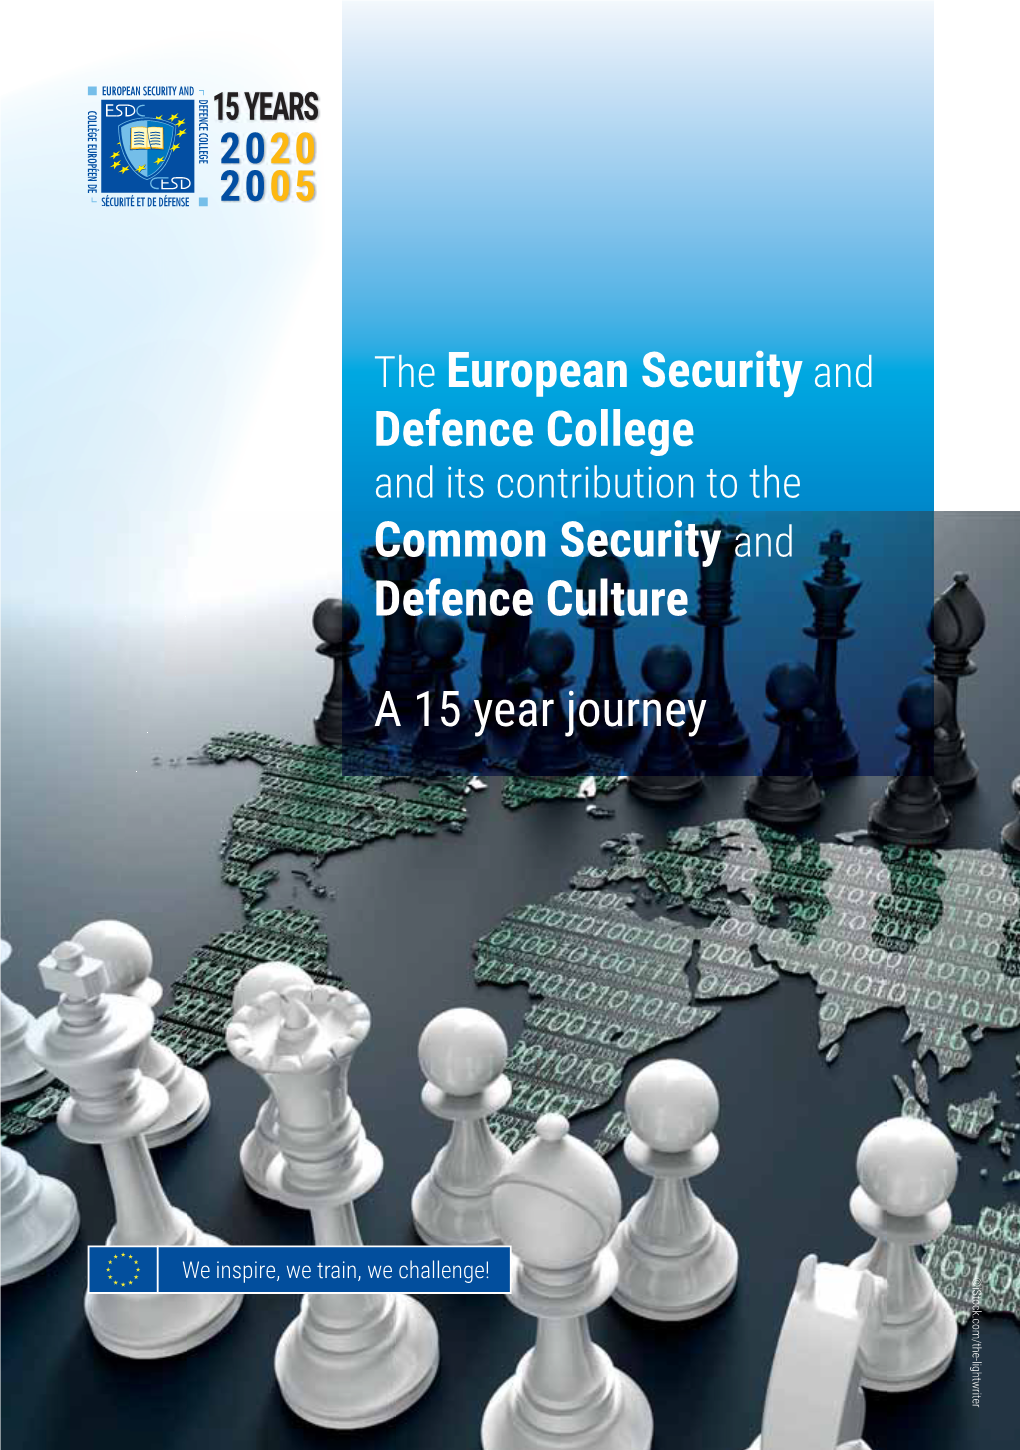 European Security and Defence College and Its Contribution to the Common Security and Defence Culture